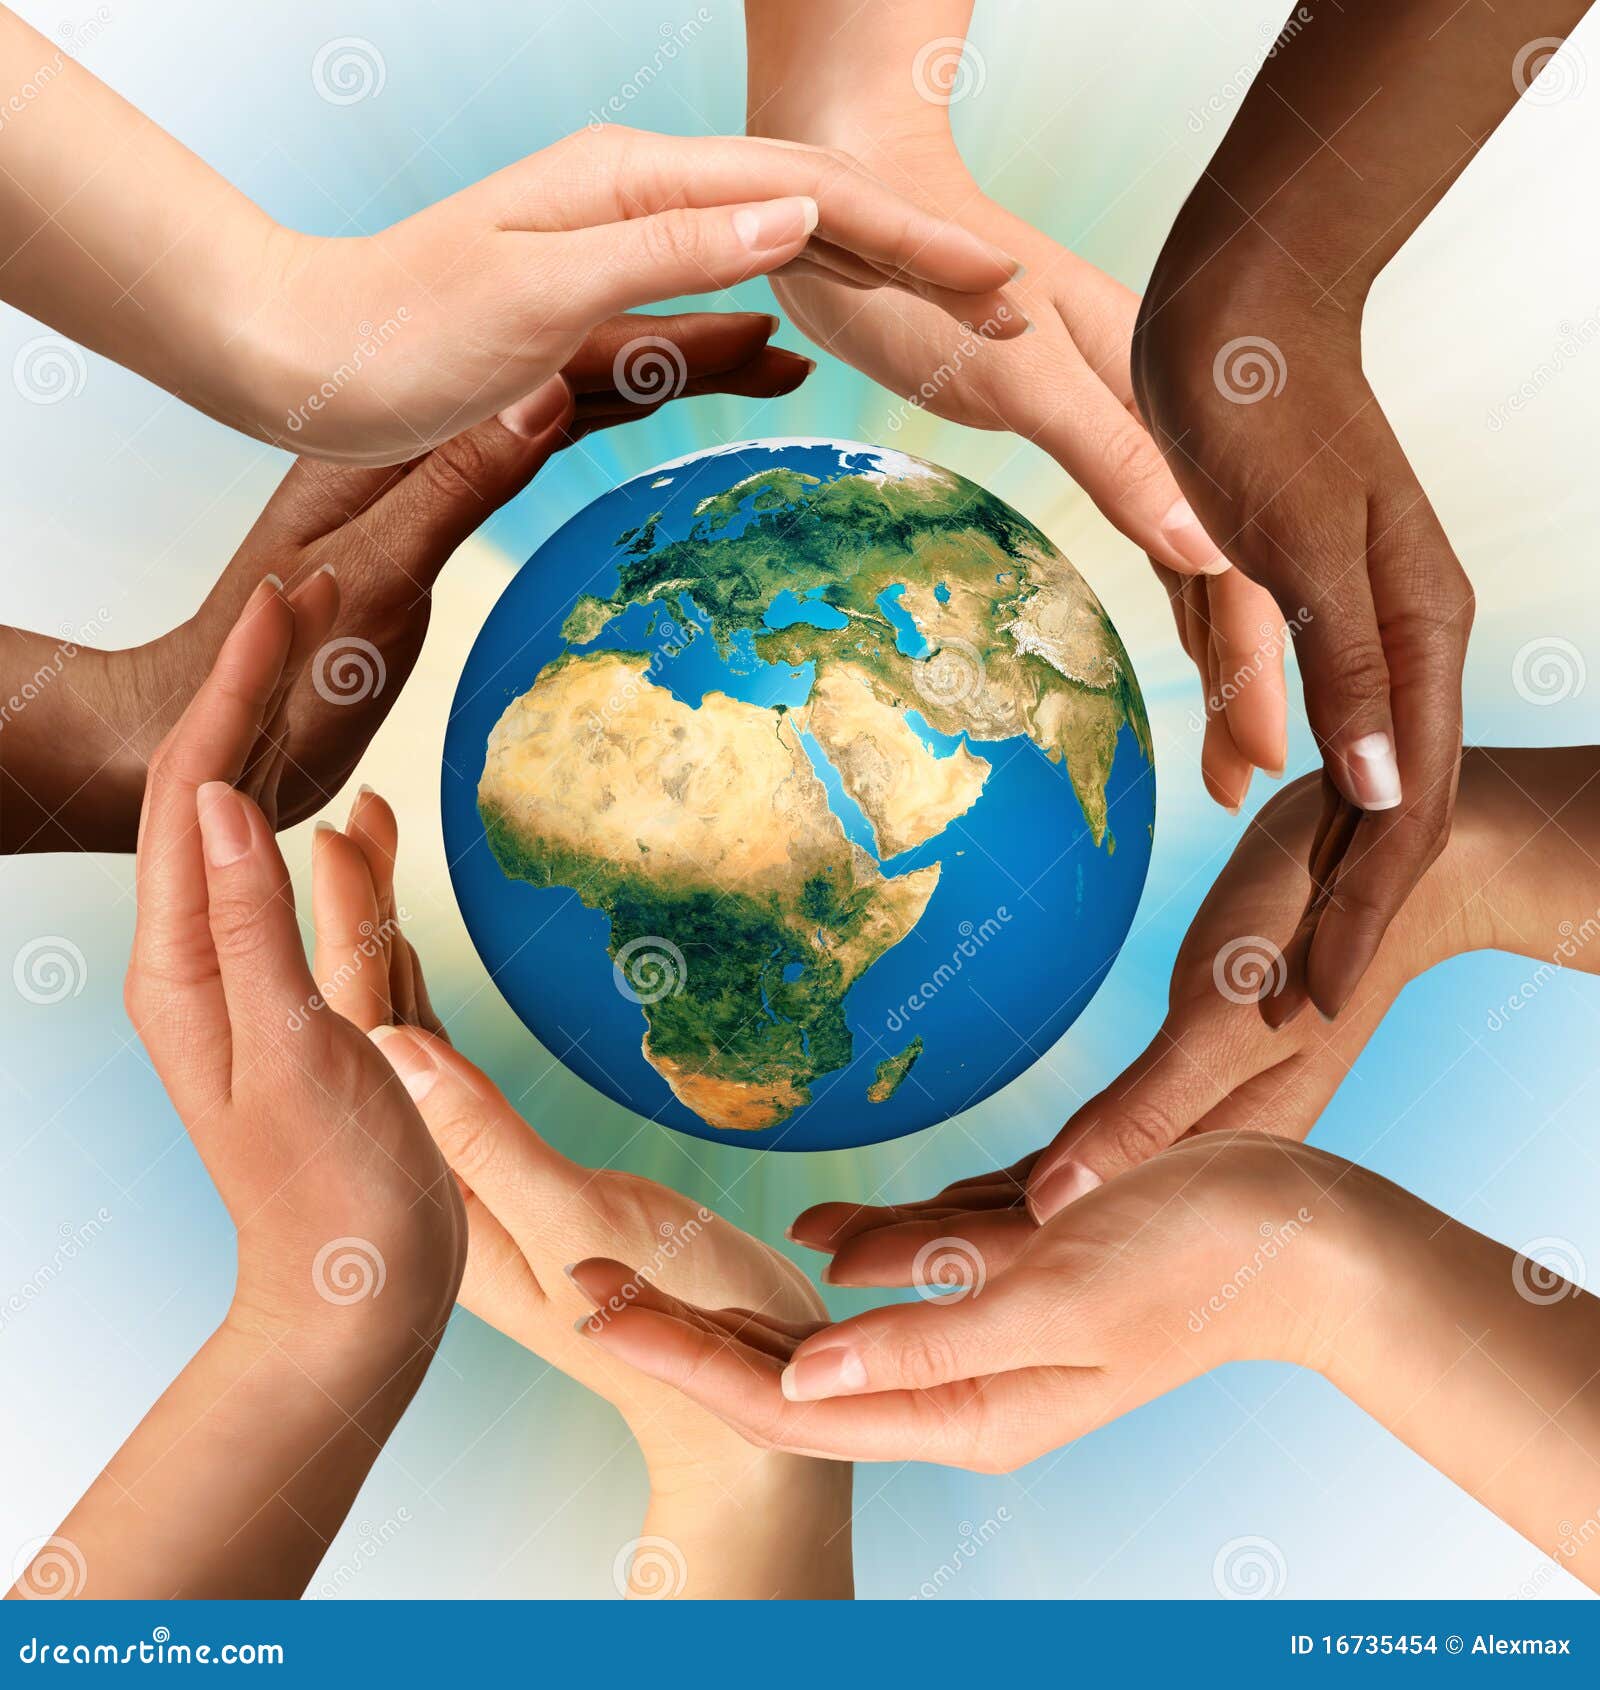 multiracial hands surrounding the earth globe